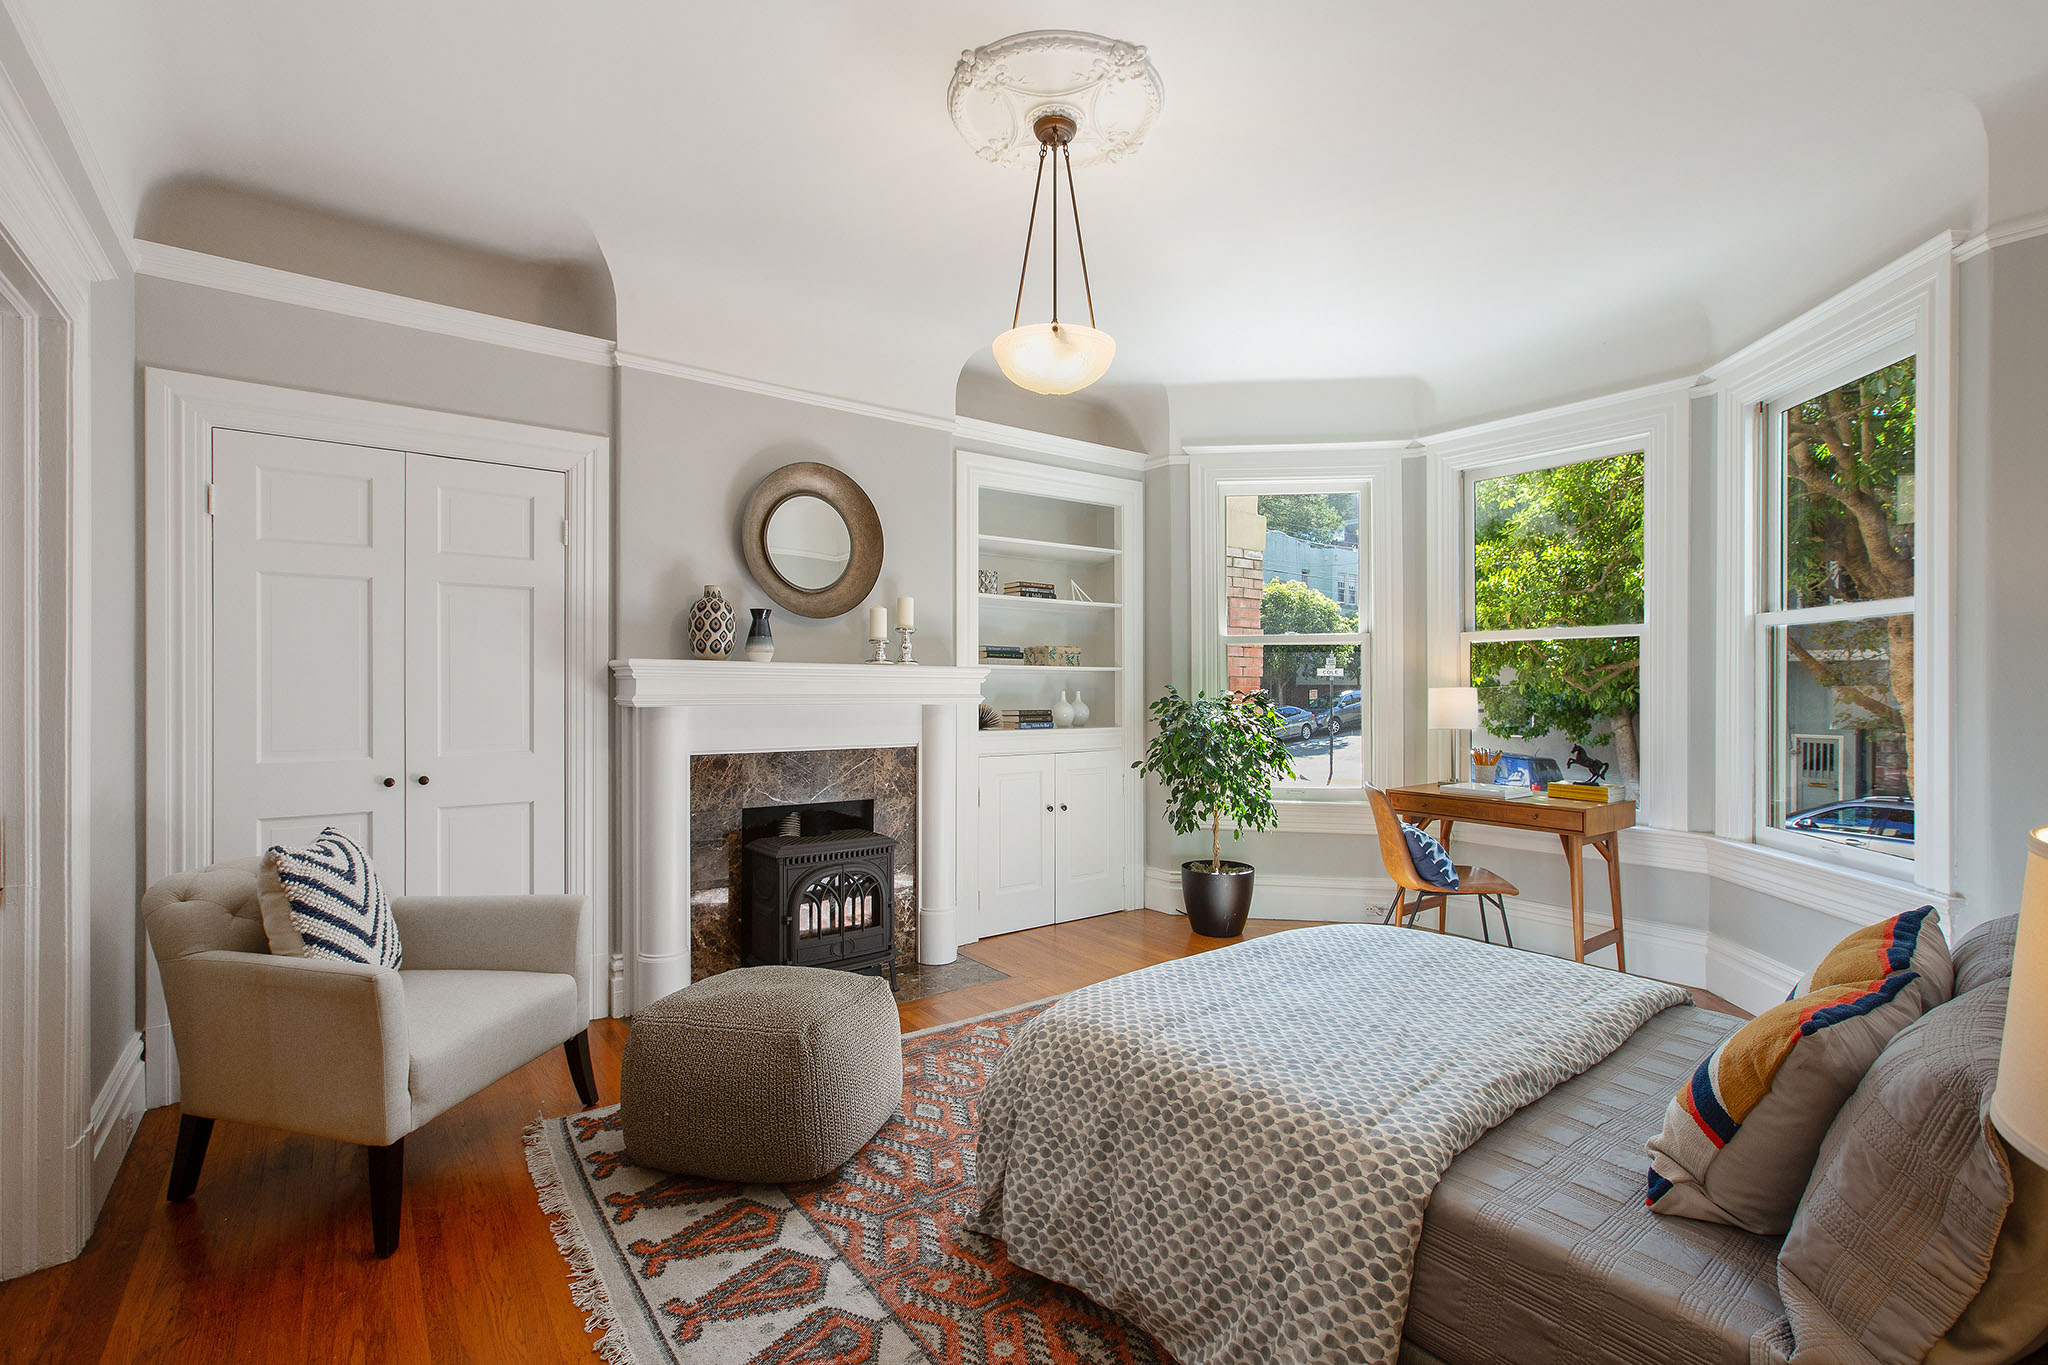 Property Photo: Bedroom with fireplace, wood floors and bay window